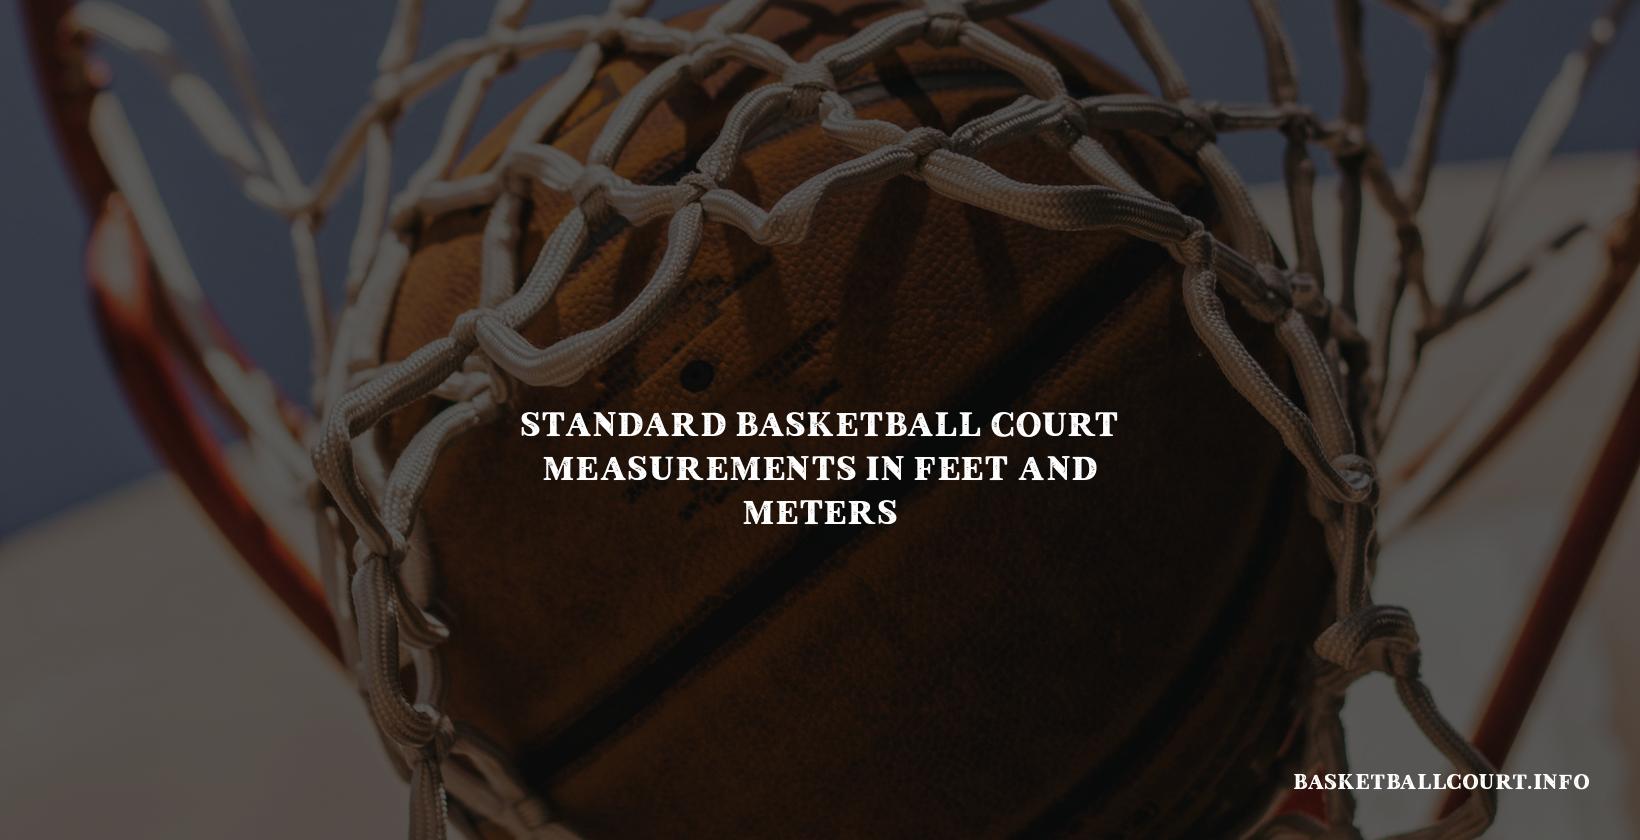 Standard Basketball Court Measurements in Feet and Meters